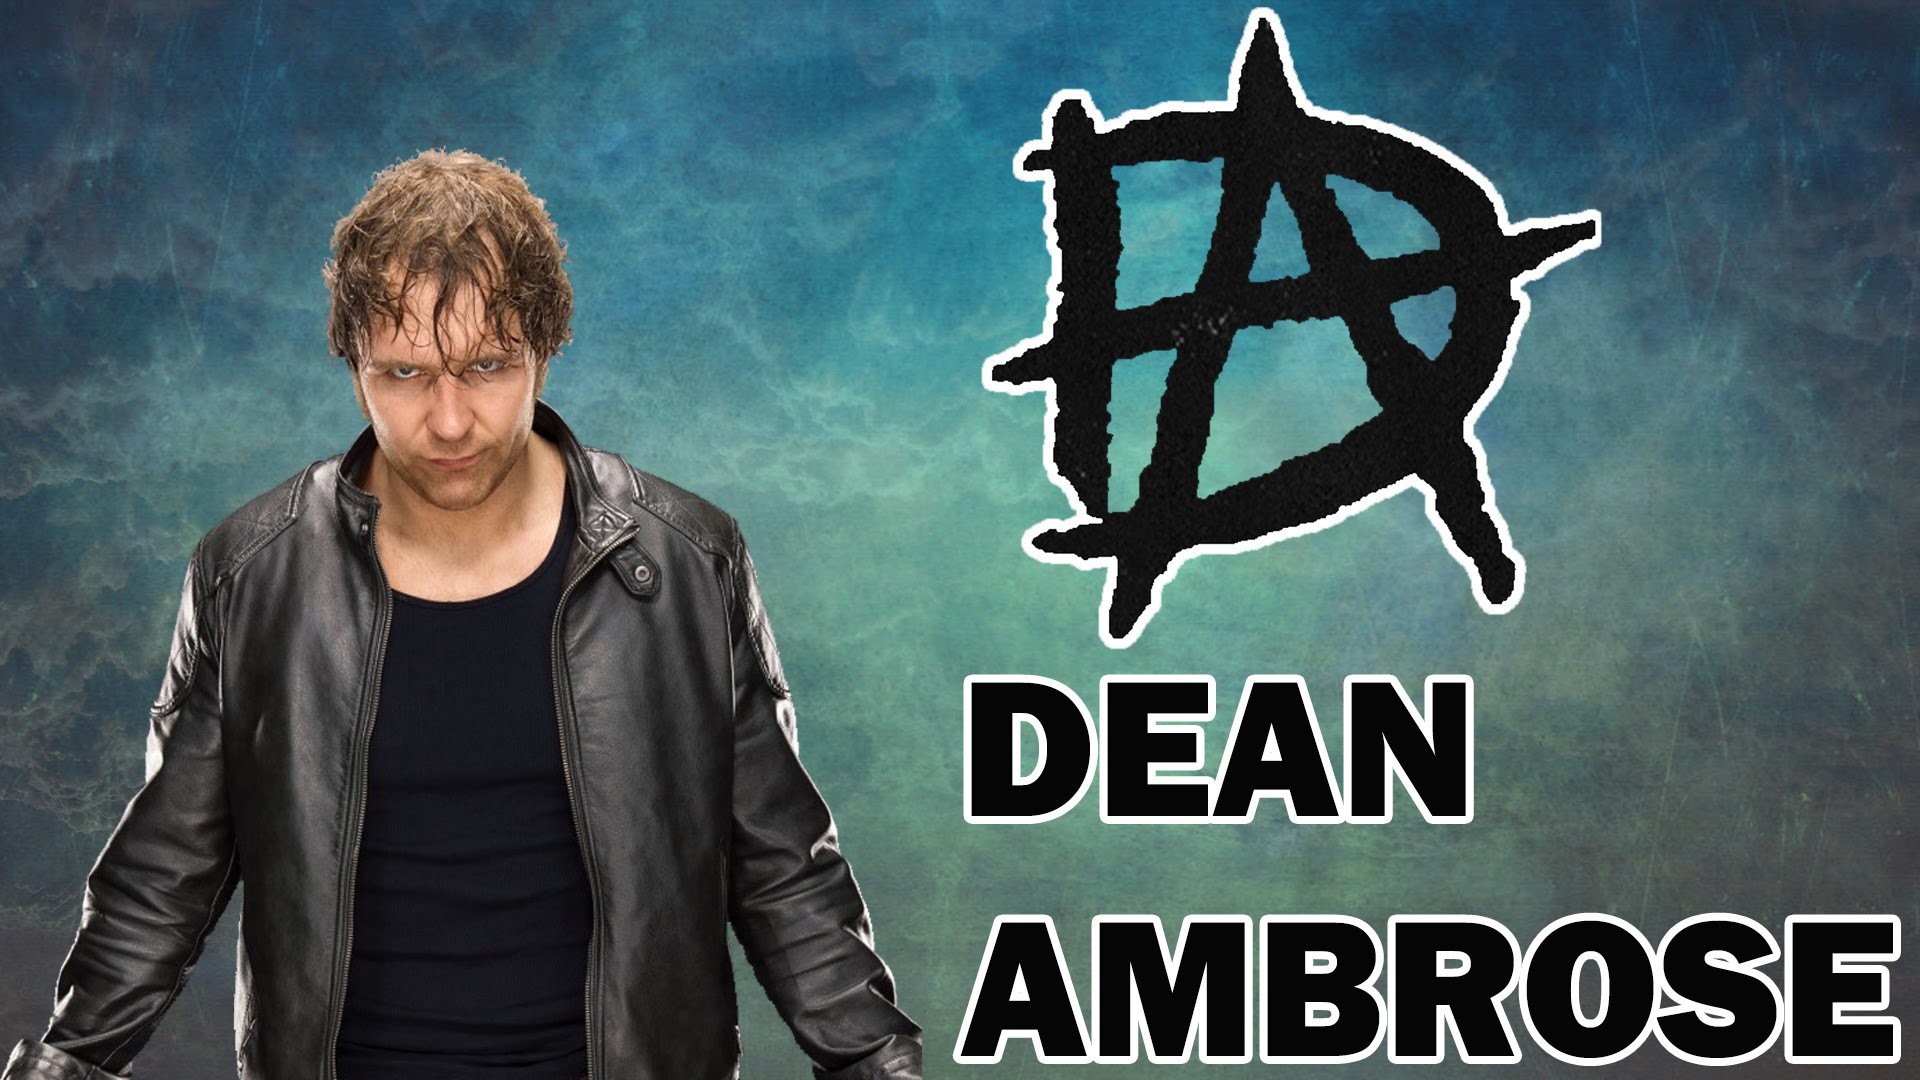 1920x1080 WWE Dean Ambrose 3rd Theme Song "Retaliation" (V2) + Download Link - YouTube